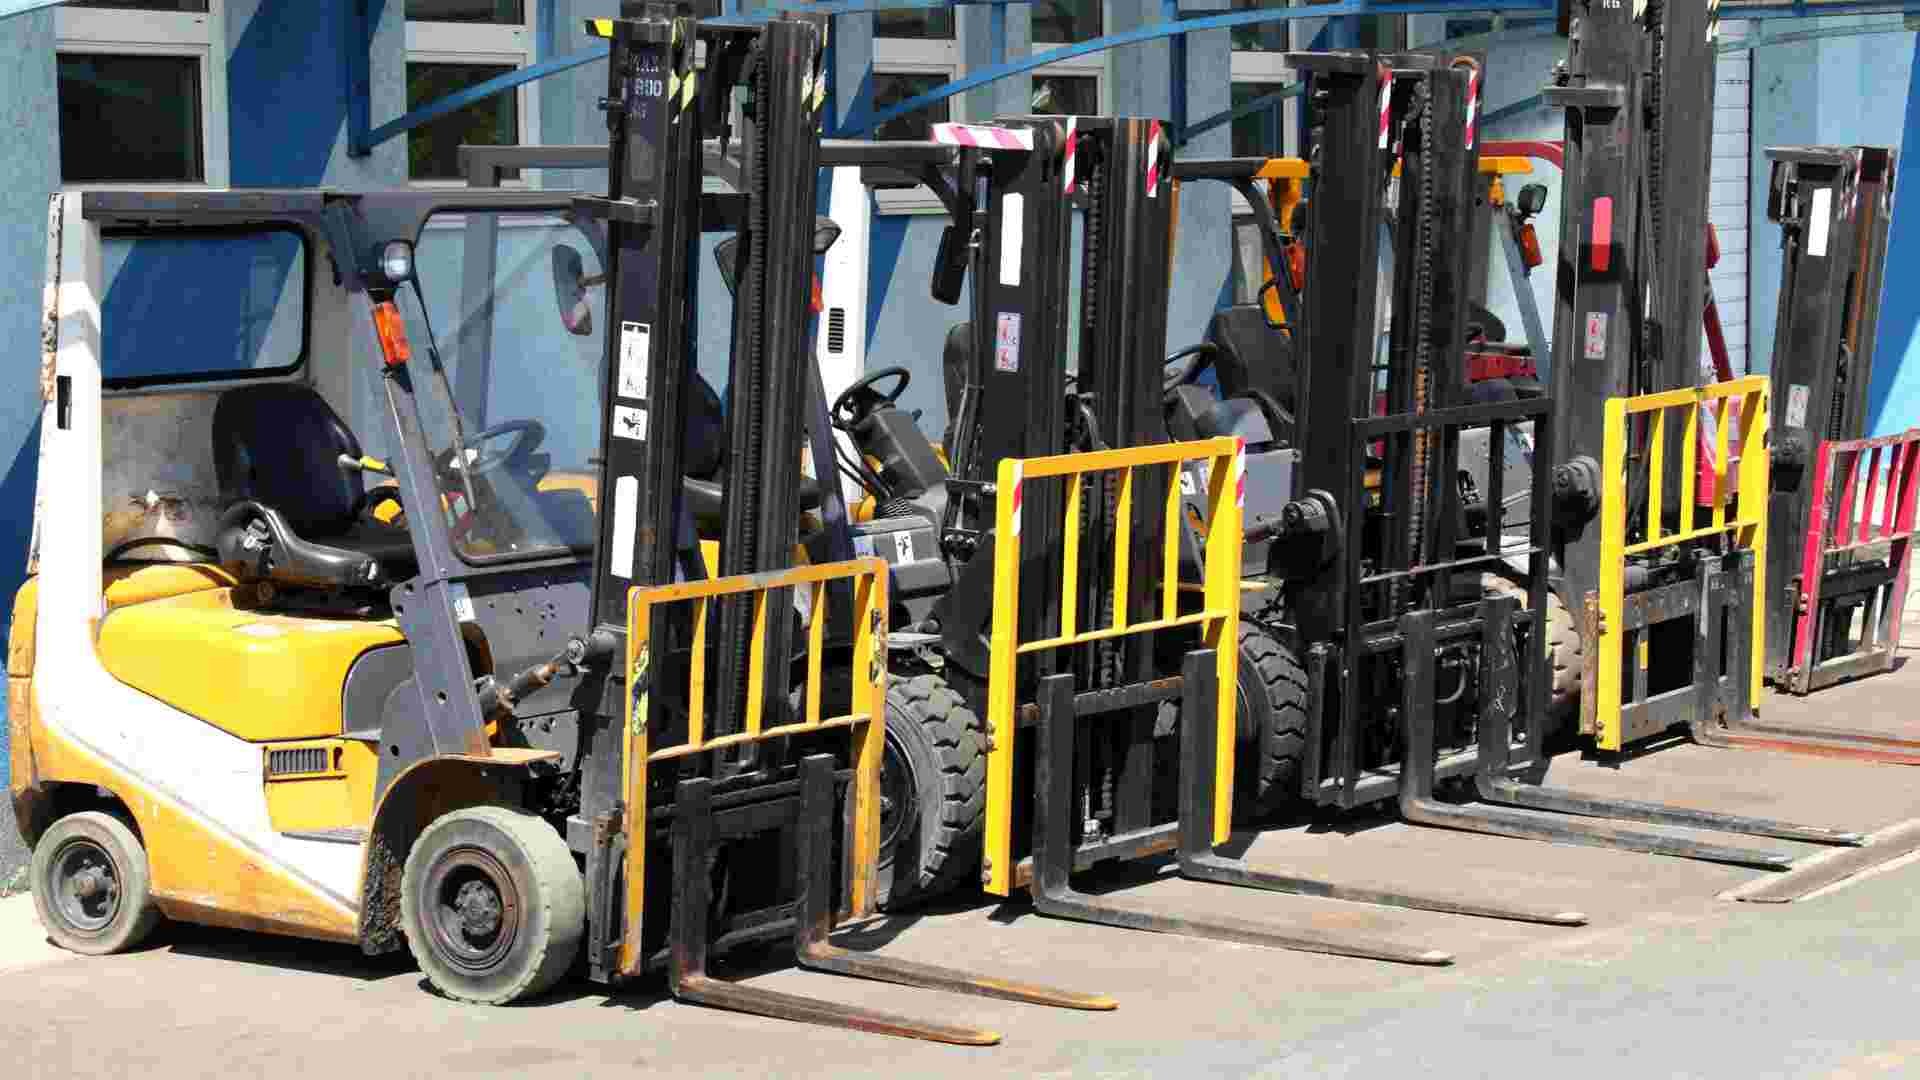 A series of forklifts lined up in a work yard